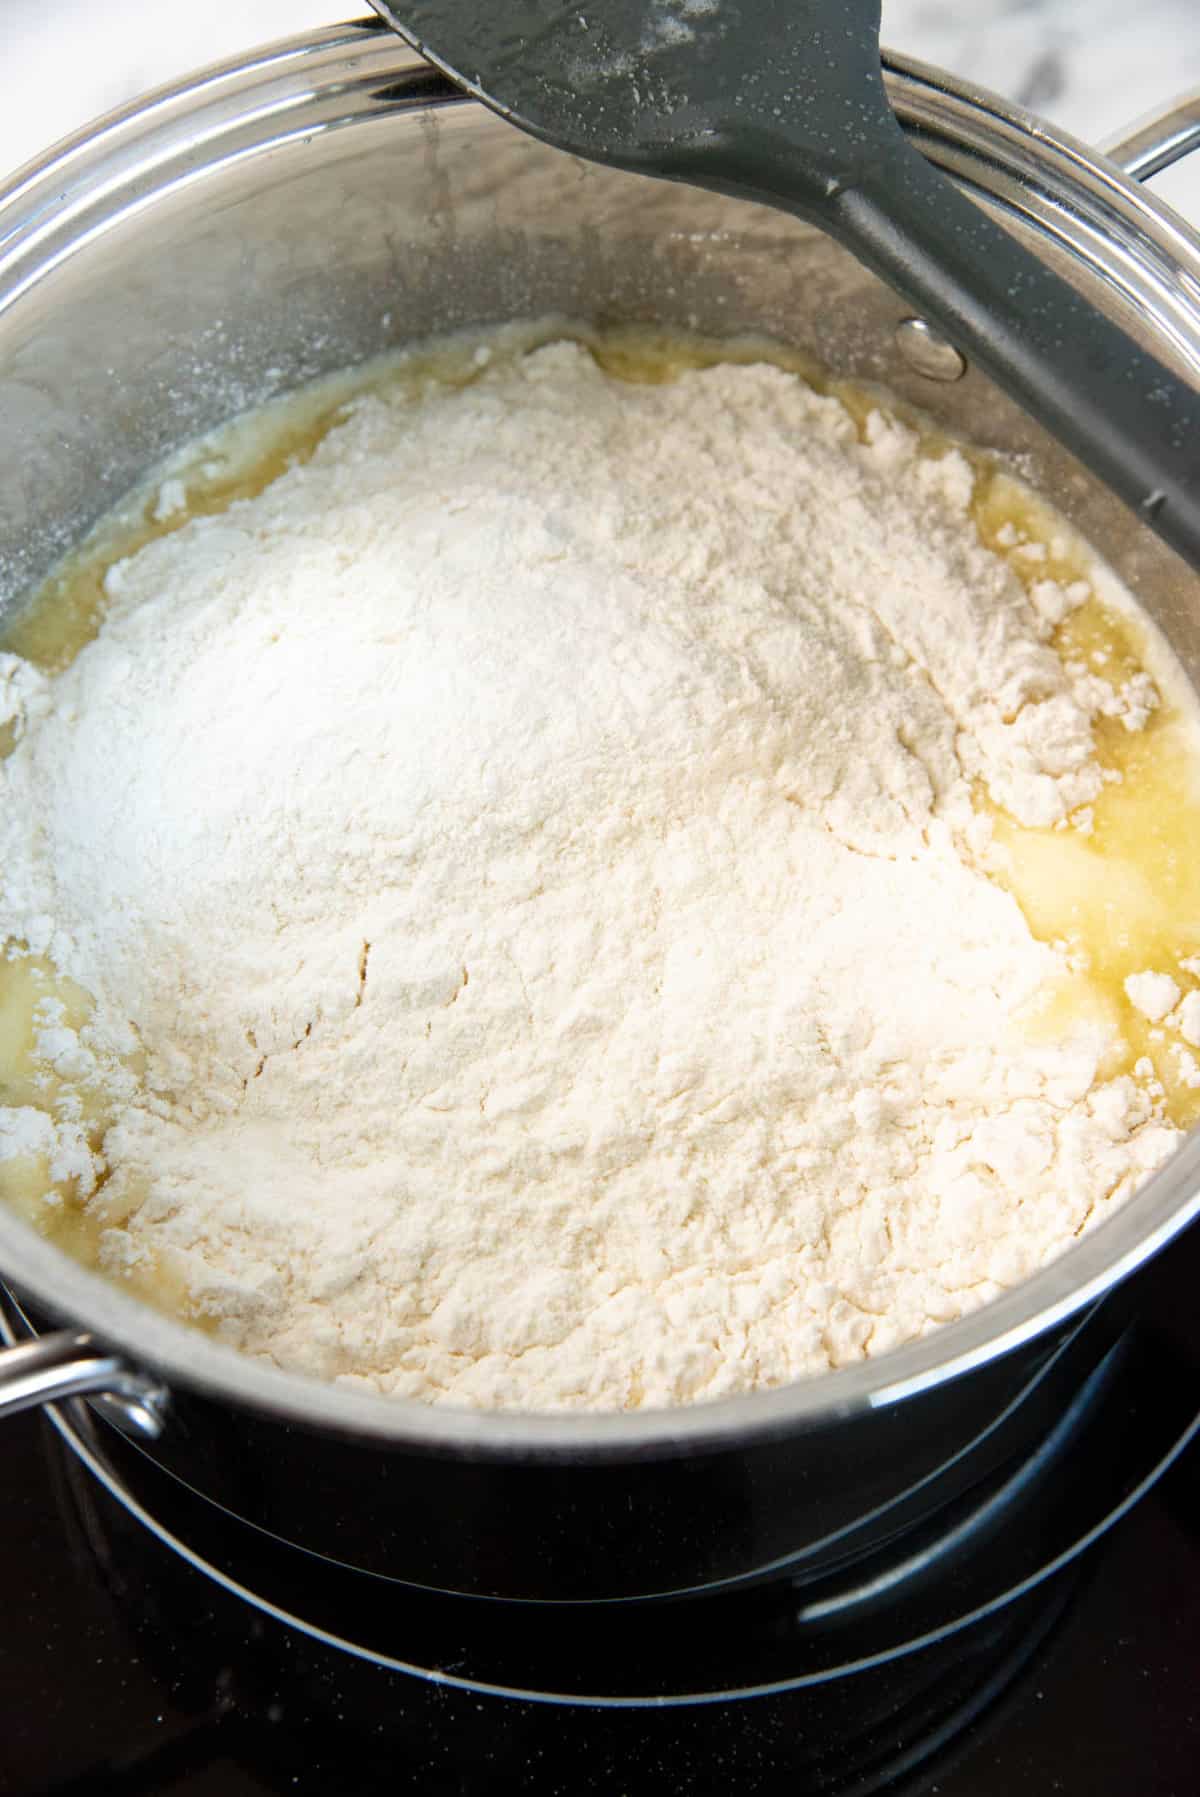 Flour added to the boiling water.